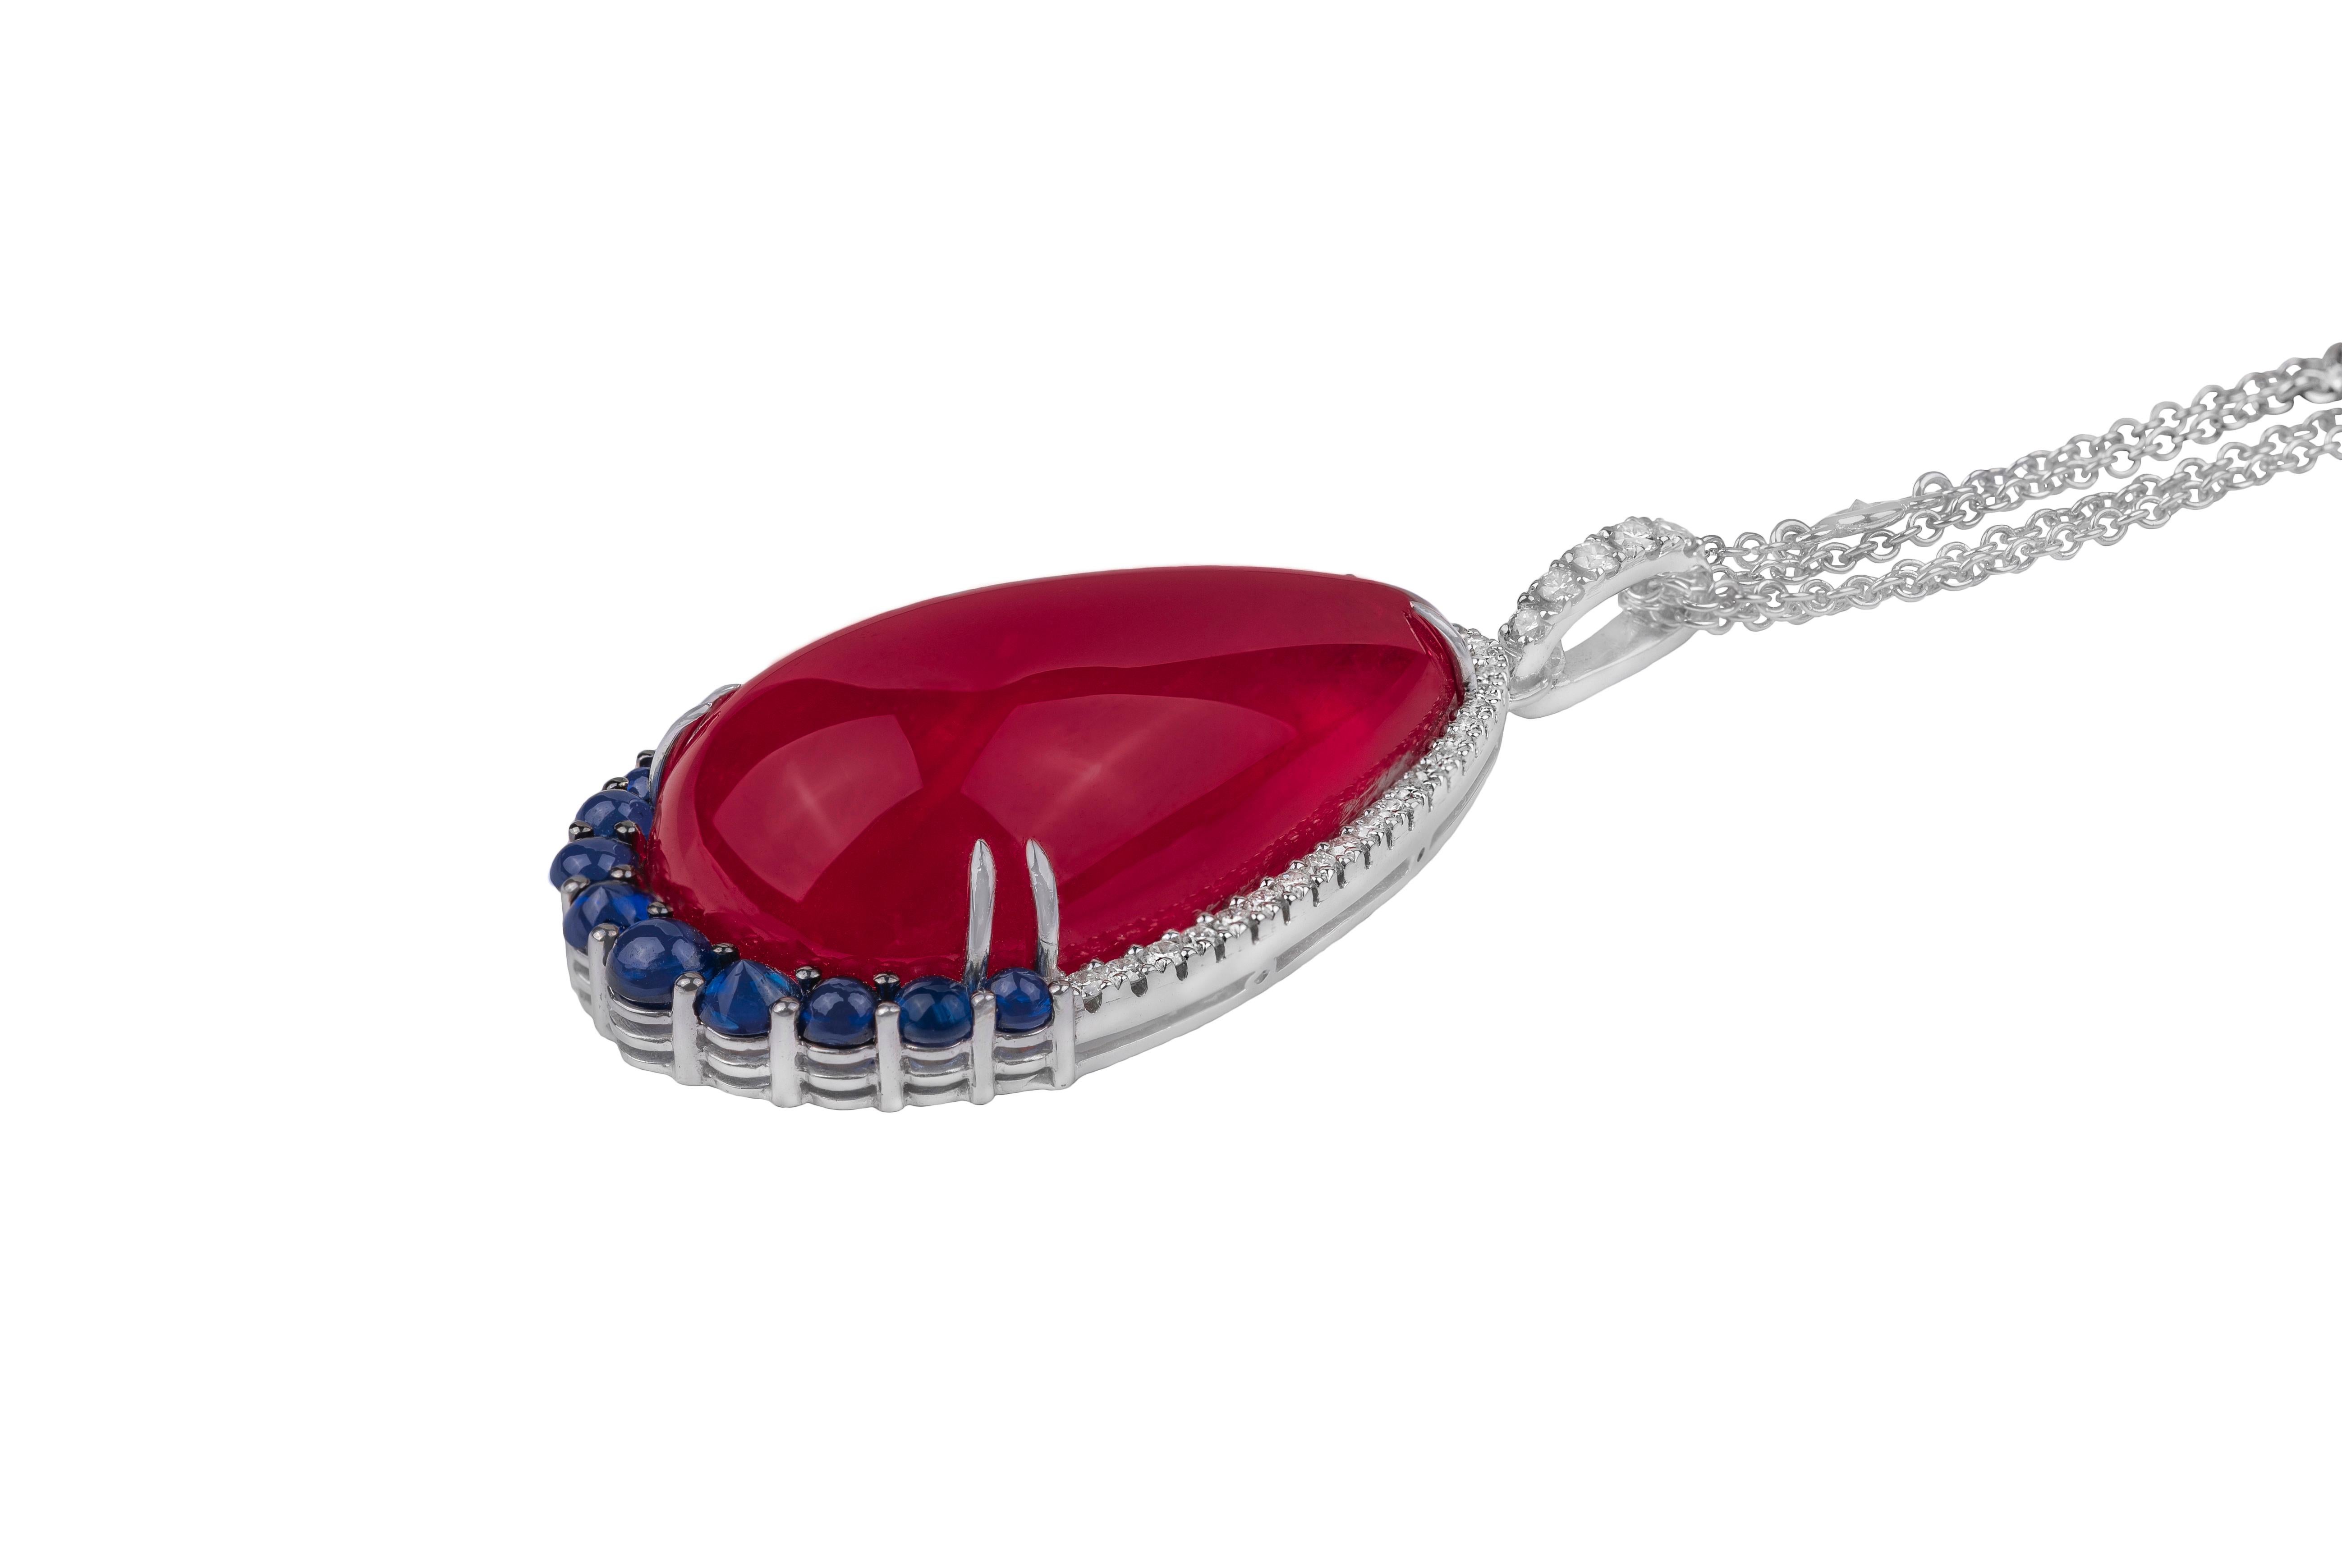 This elegant 18k white gold necklace is made in Italy by Fanuele Gioielli.    
The drop shaped pendant is composed by cabochon cut drop shaped ruby, nine cabochon cut round shaped sapphires and a row of brilliant cut white diamonds. Brilliant cut